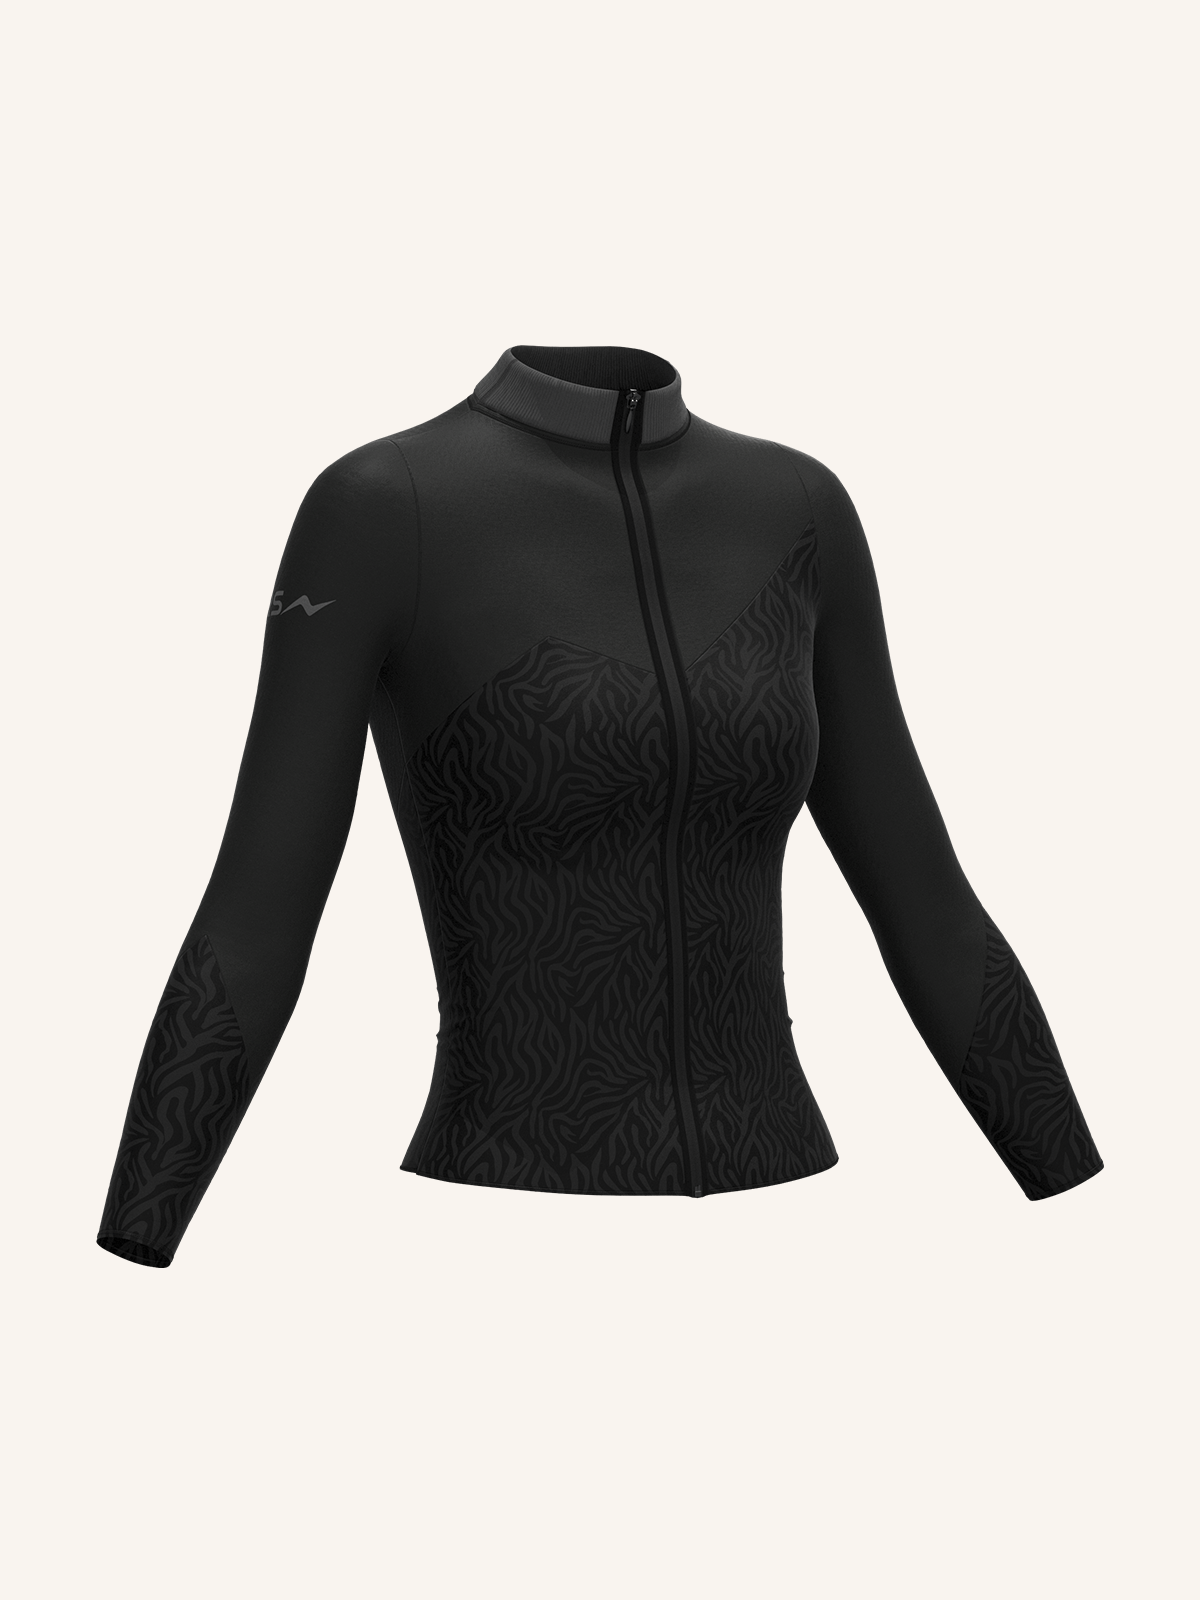 Outdoor Full Zip Sweatshirt with Thermoregulatory Fabric for Women | Single Pack | PRS PRO 506